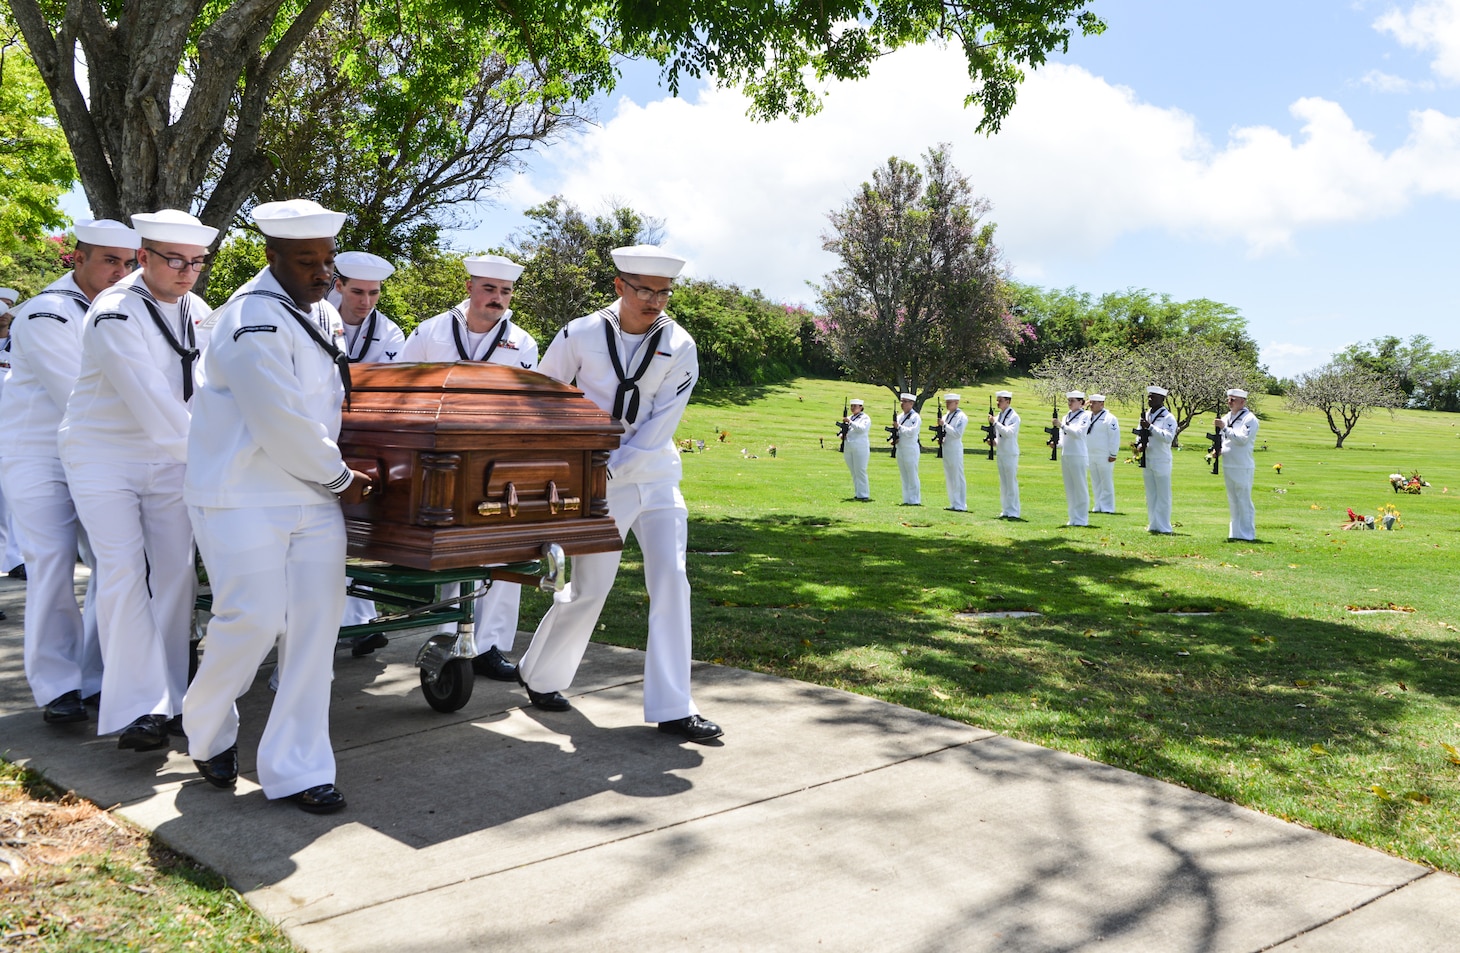 U.S. Navy Sailors assigned to Navy Region Hawaii and the Defense POW/MIA Accounting Agency (DPAA) move a casket toward a hearse during an interment at the National Memorial Cemetery of the Pacific, Honolulu, Hawaii, April 13, 2023. The cemetery allows all members of the armed forces who have met a minimum active duty service requirement to be buried there. (U.S. Air Force photo by Staff Sgt. David Owsianka)